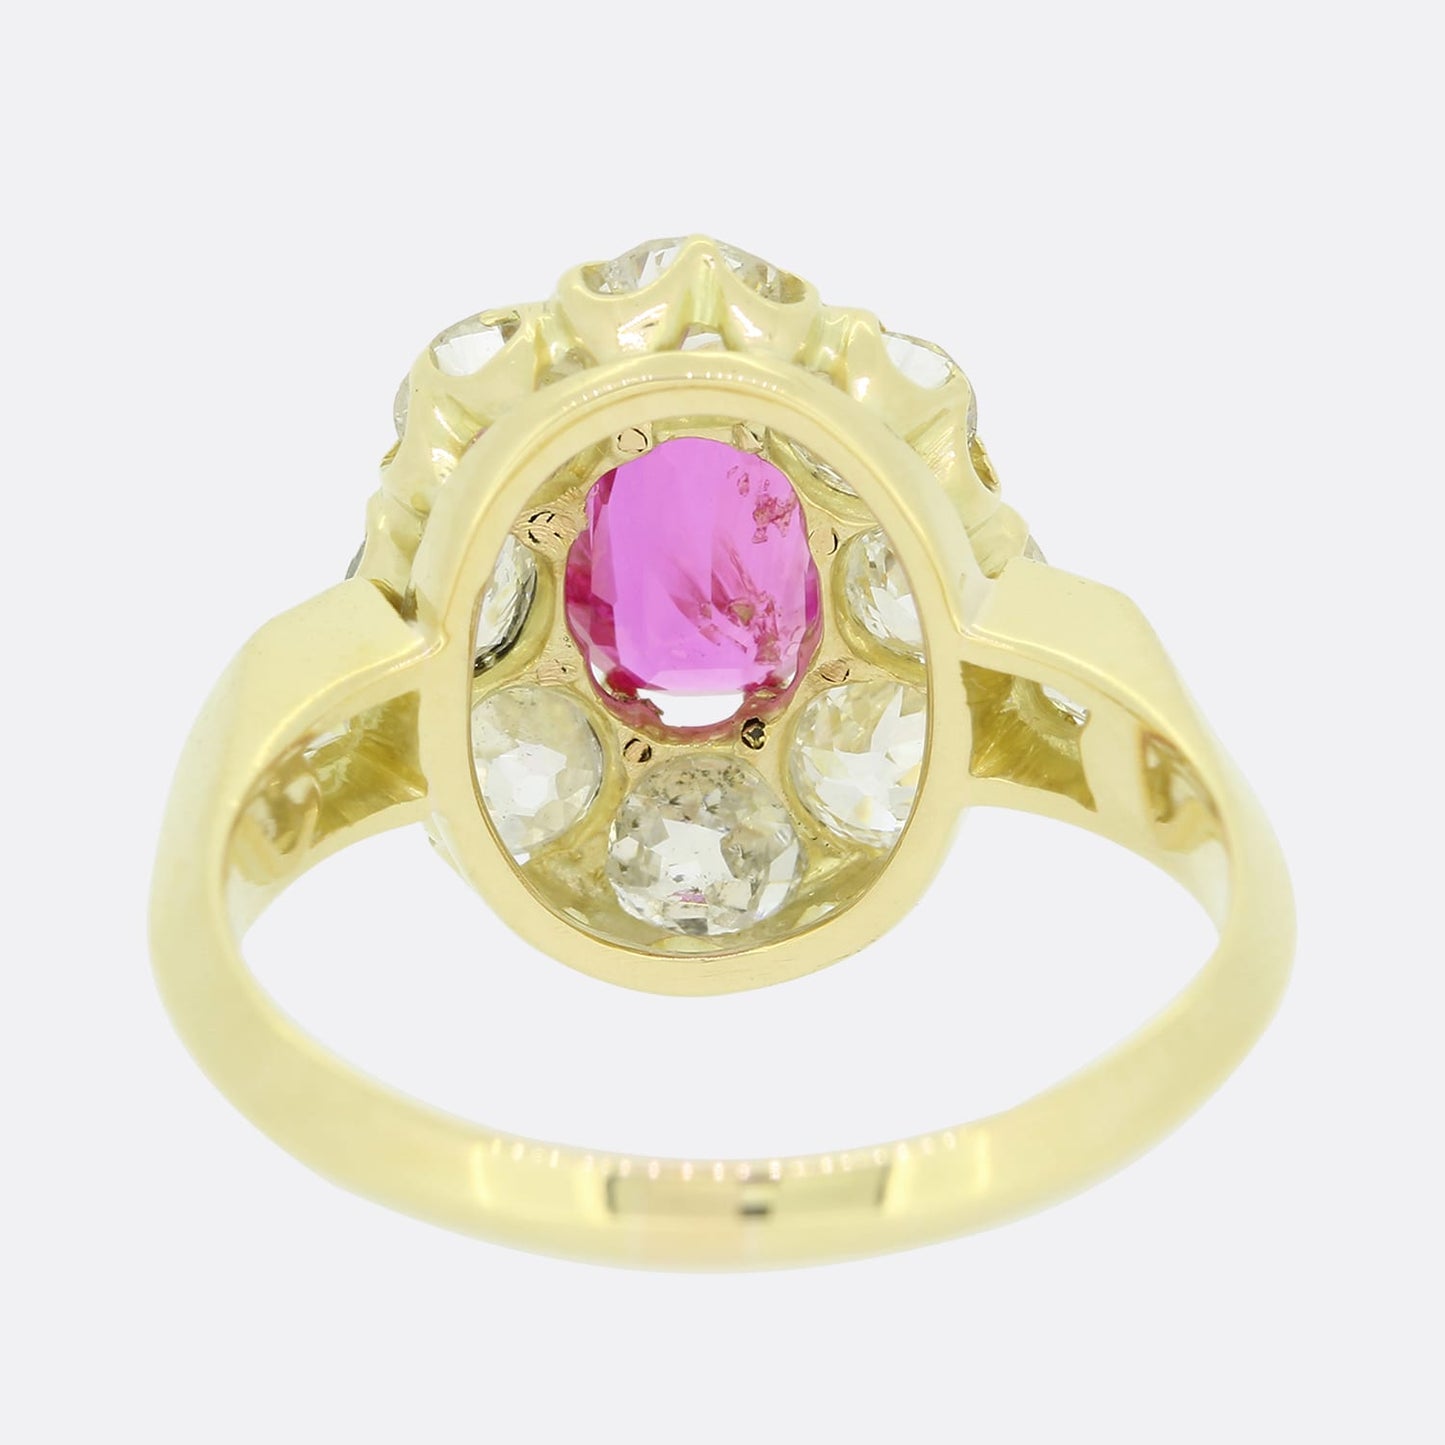 Burmese Ruby and Old Cut Diamond Cluster Ring